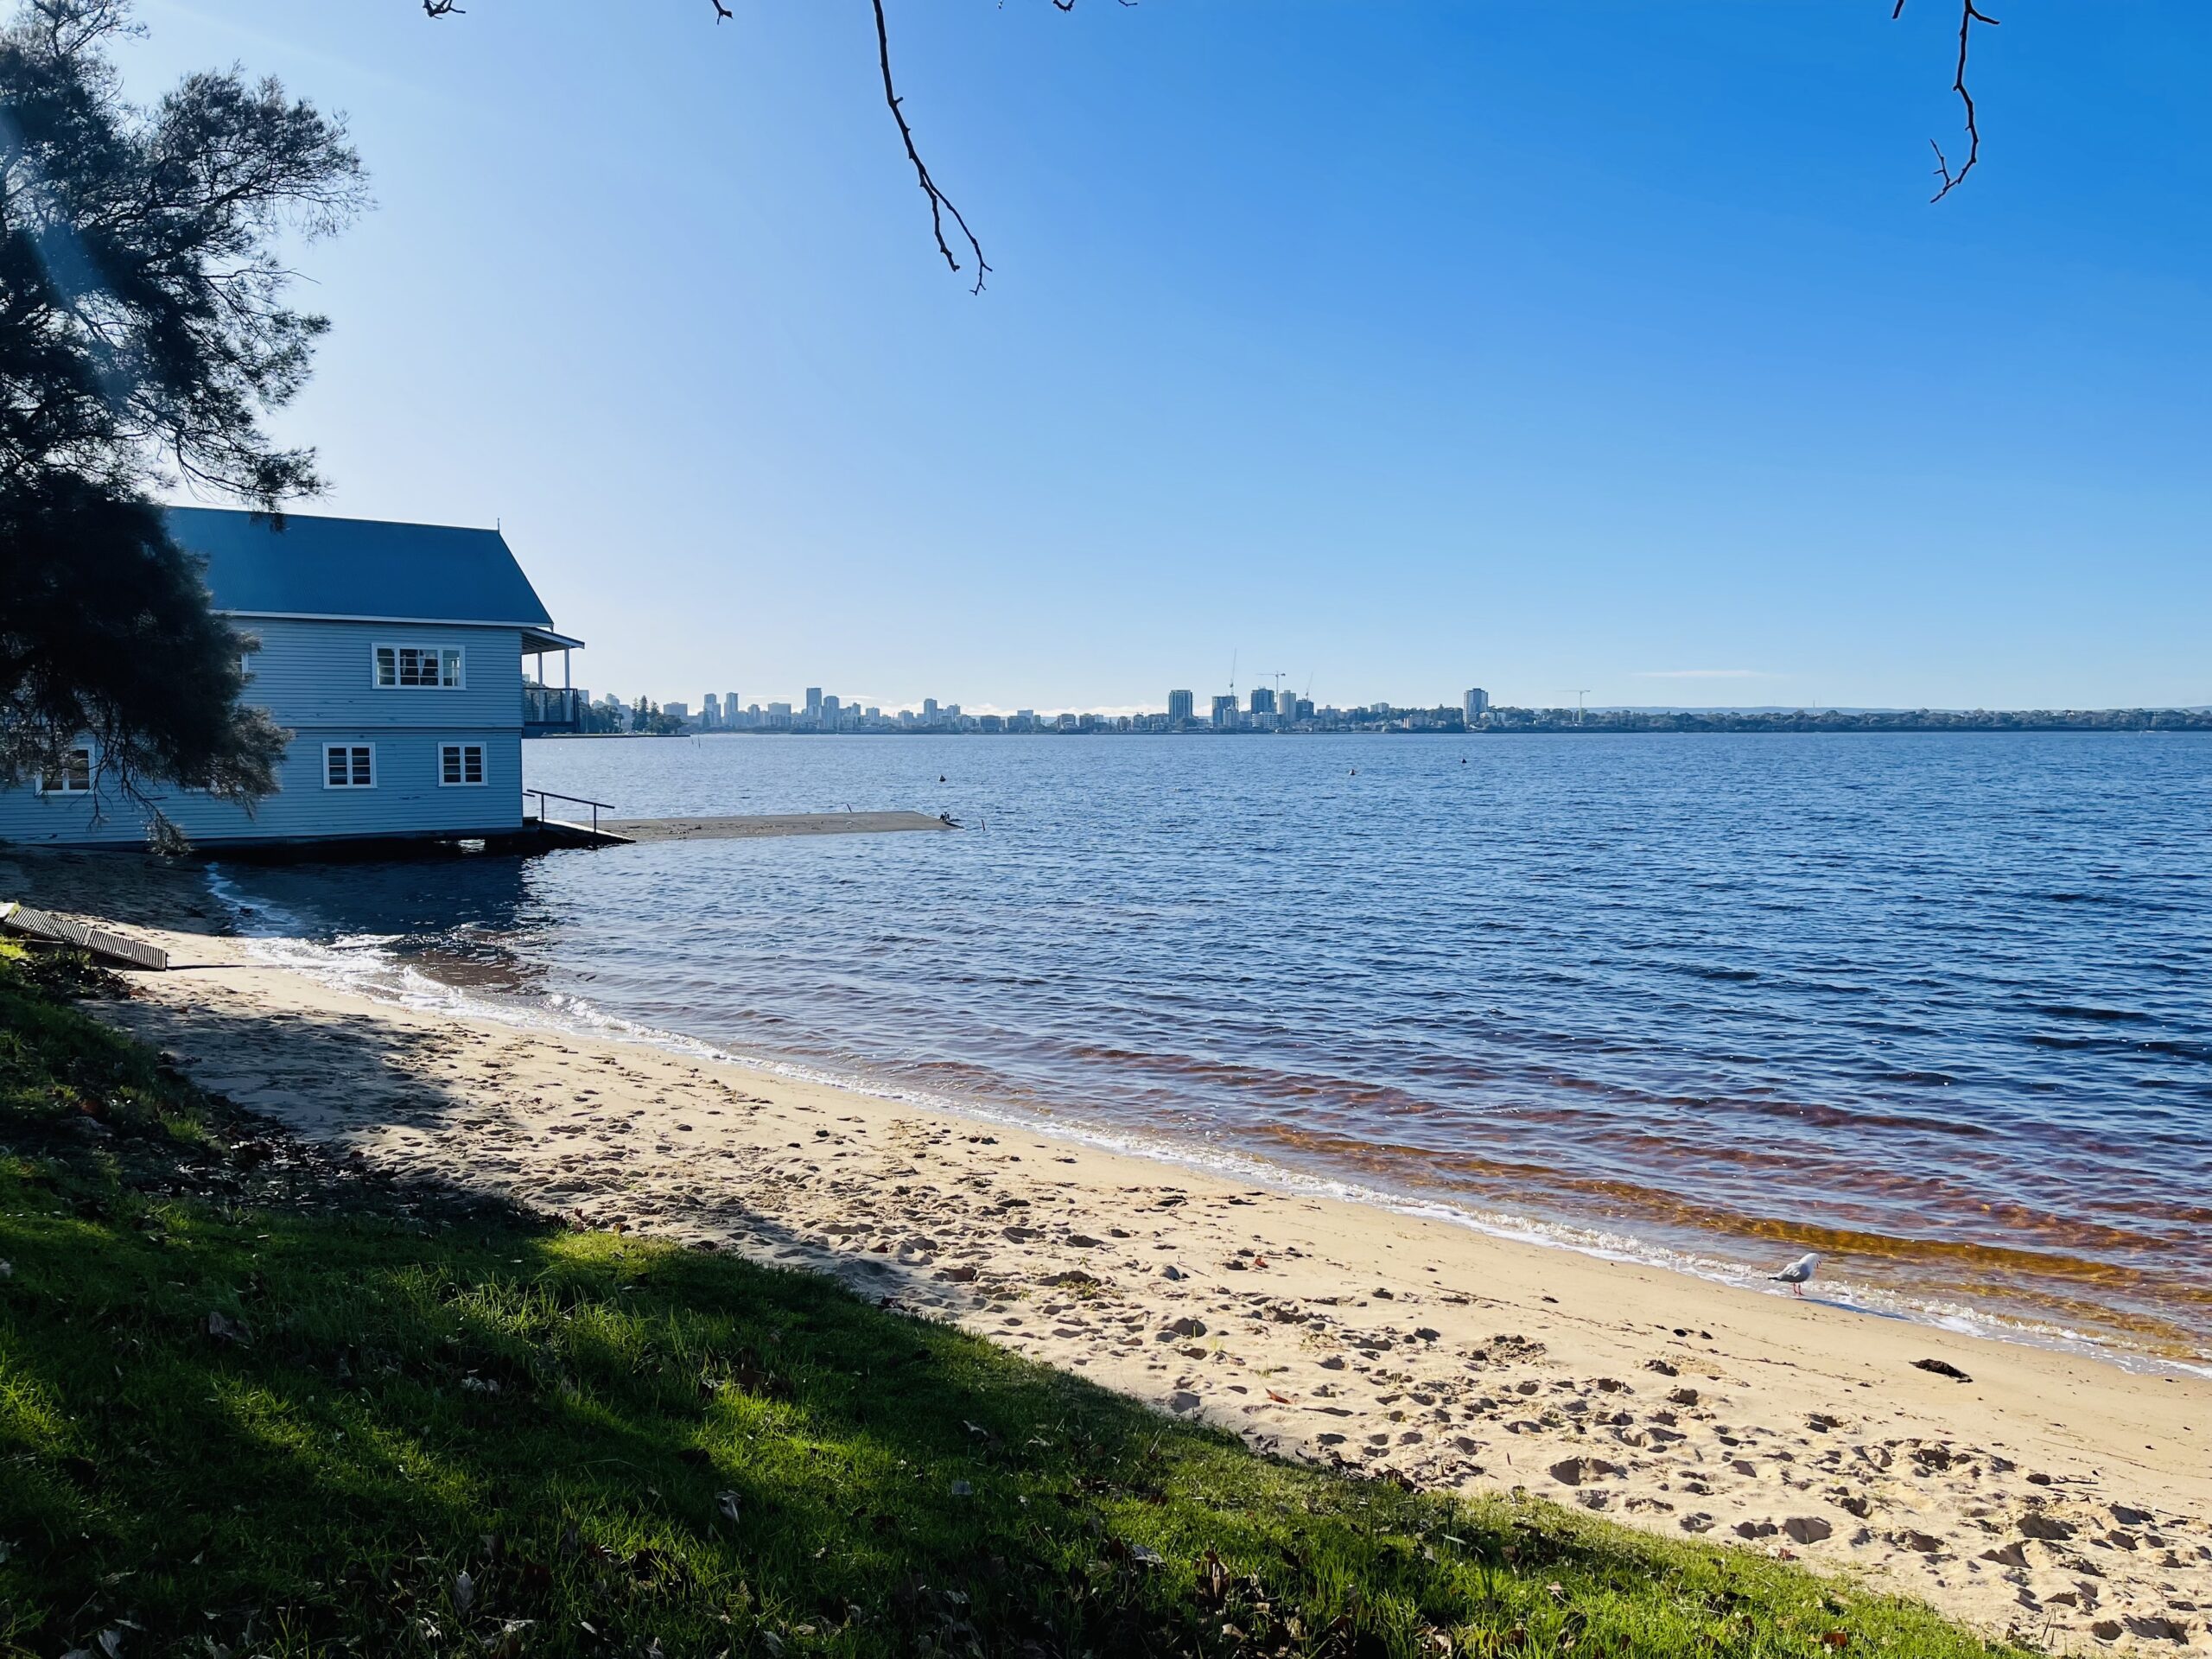 A photo of the bank of the Swan River at Matilda Bay Reserve. Green grass leads to yellow sand, which leads to the river’s edge. A two-storey building sits on the edge of the water to the left of the image. The sky above is bright blue and clear.